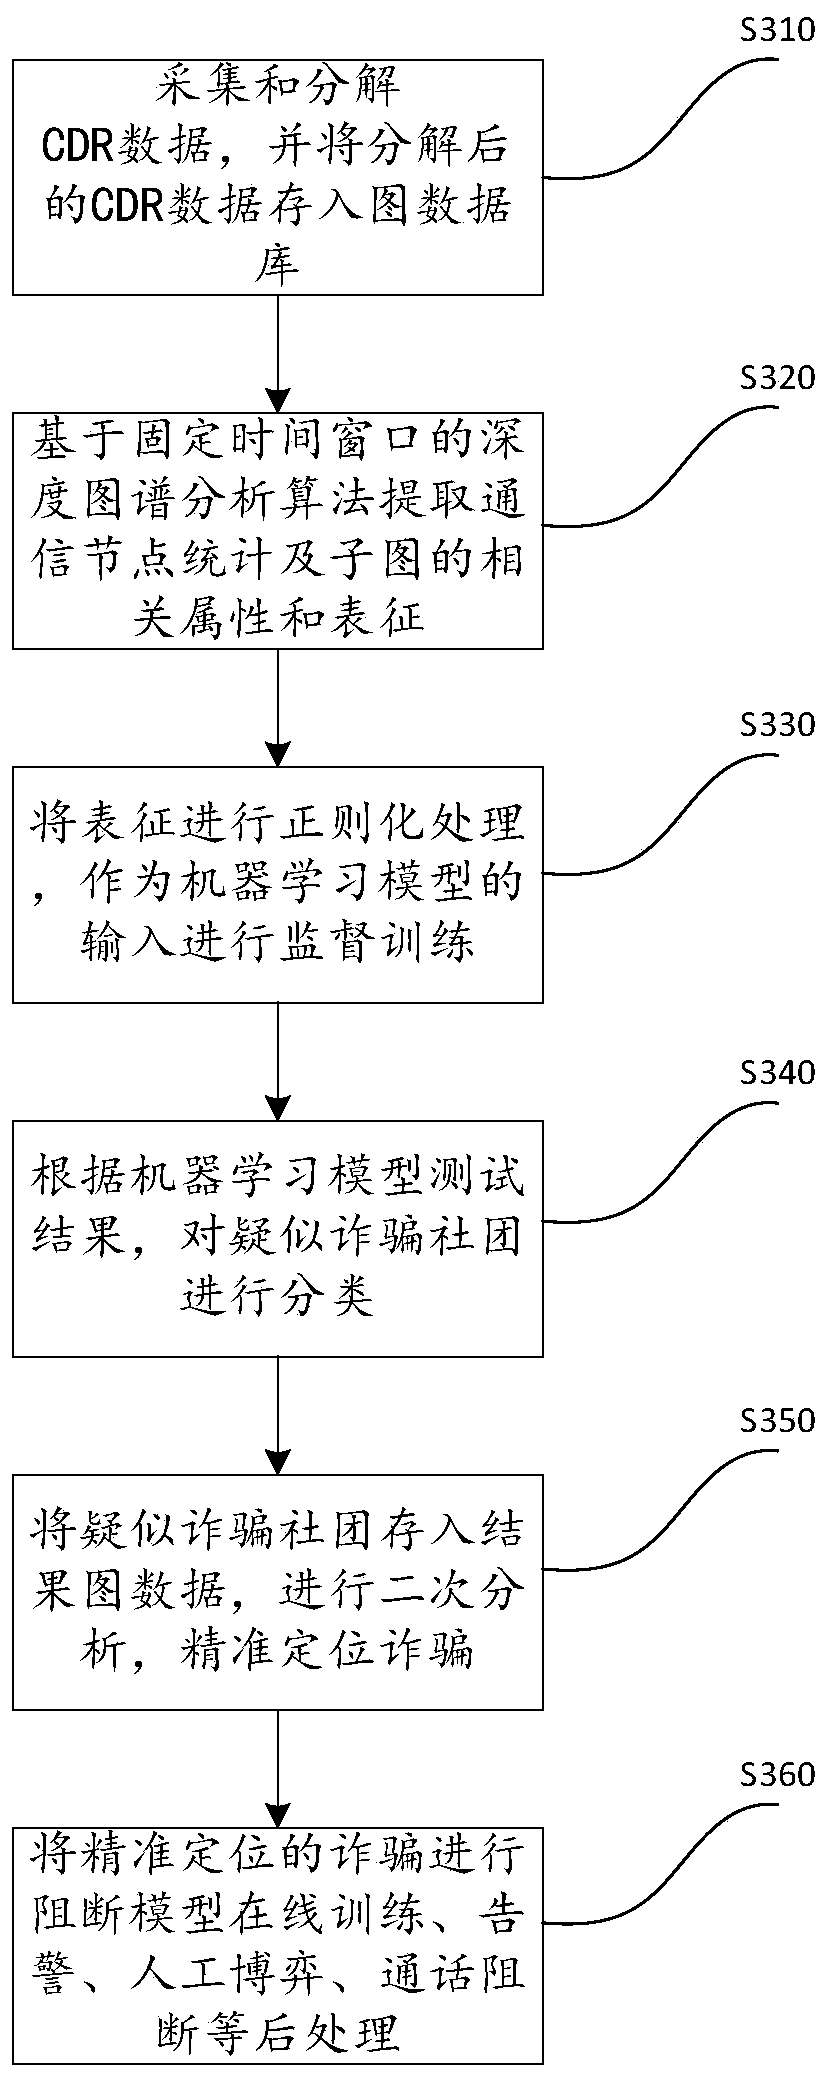 Personal harmful call detection method and device based on streaming data graph and readable medium